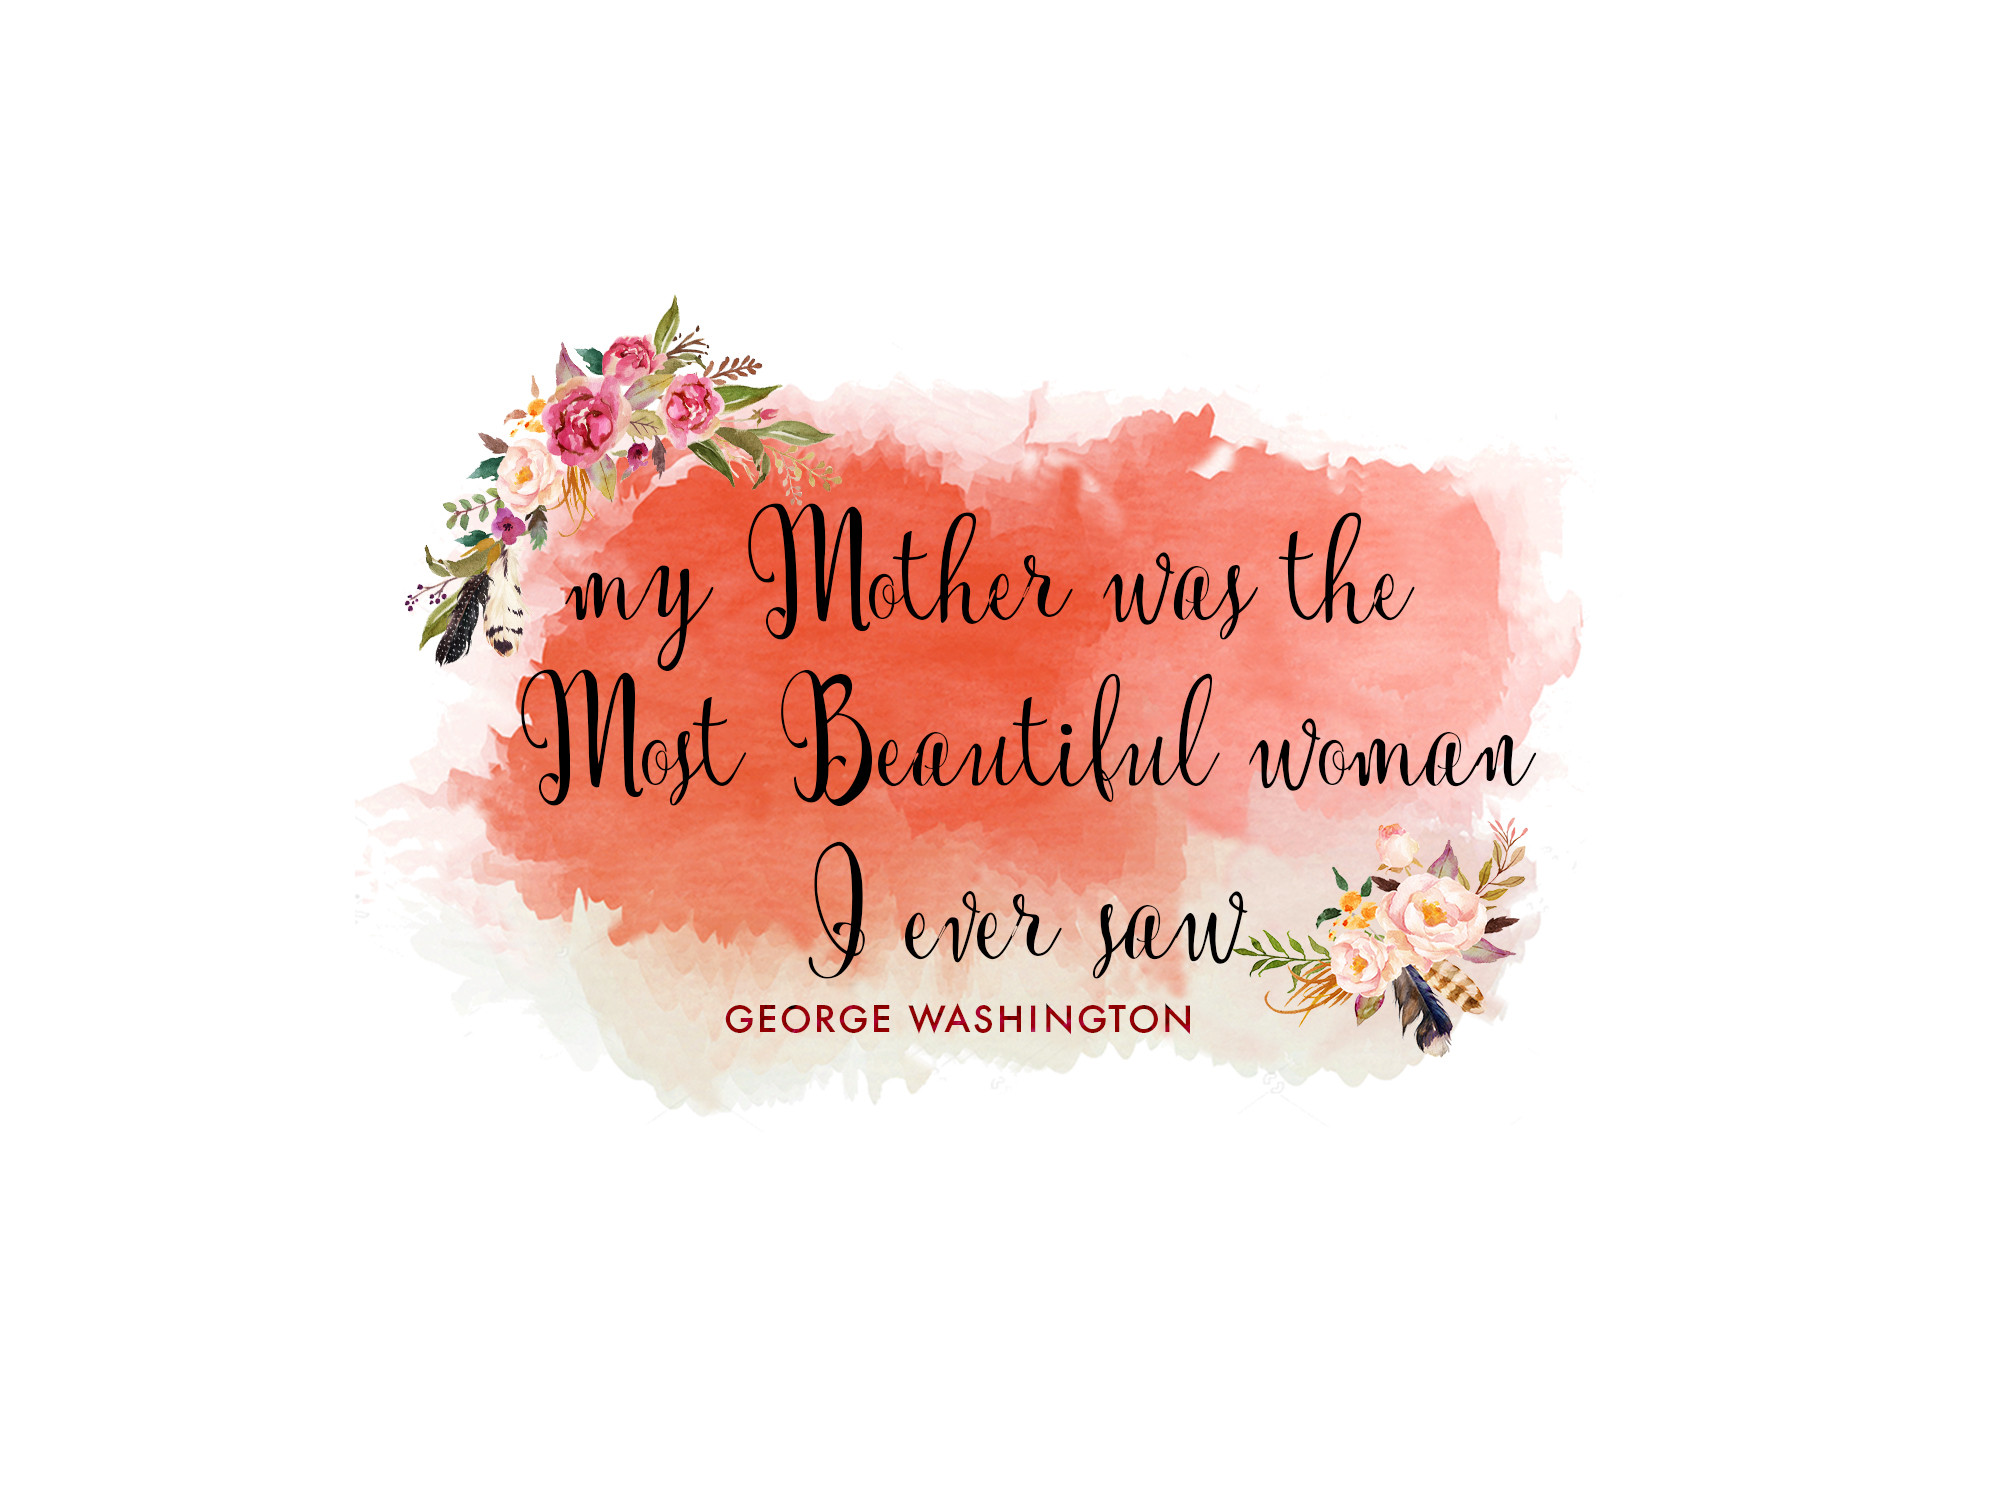 Quotes On Mother Day
 Mother s Day Quotes Slogans Quotations & Sayings 2019